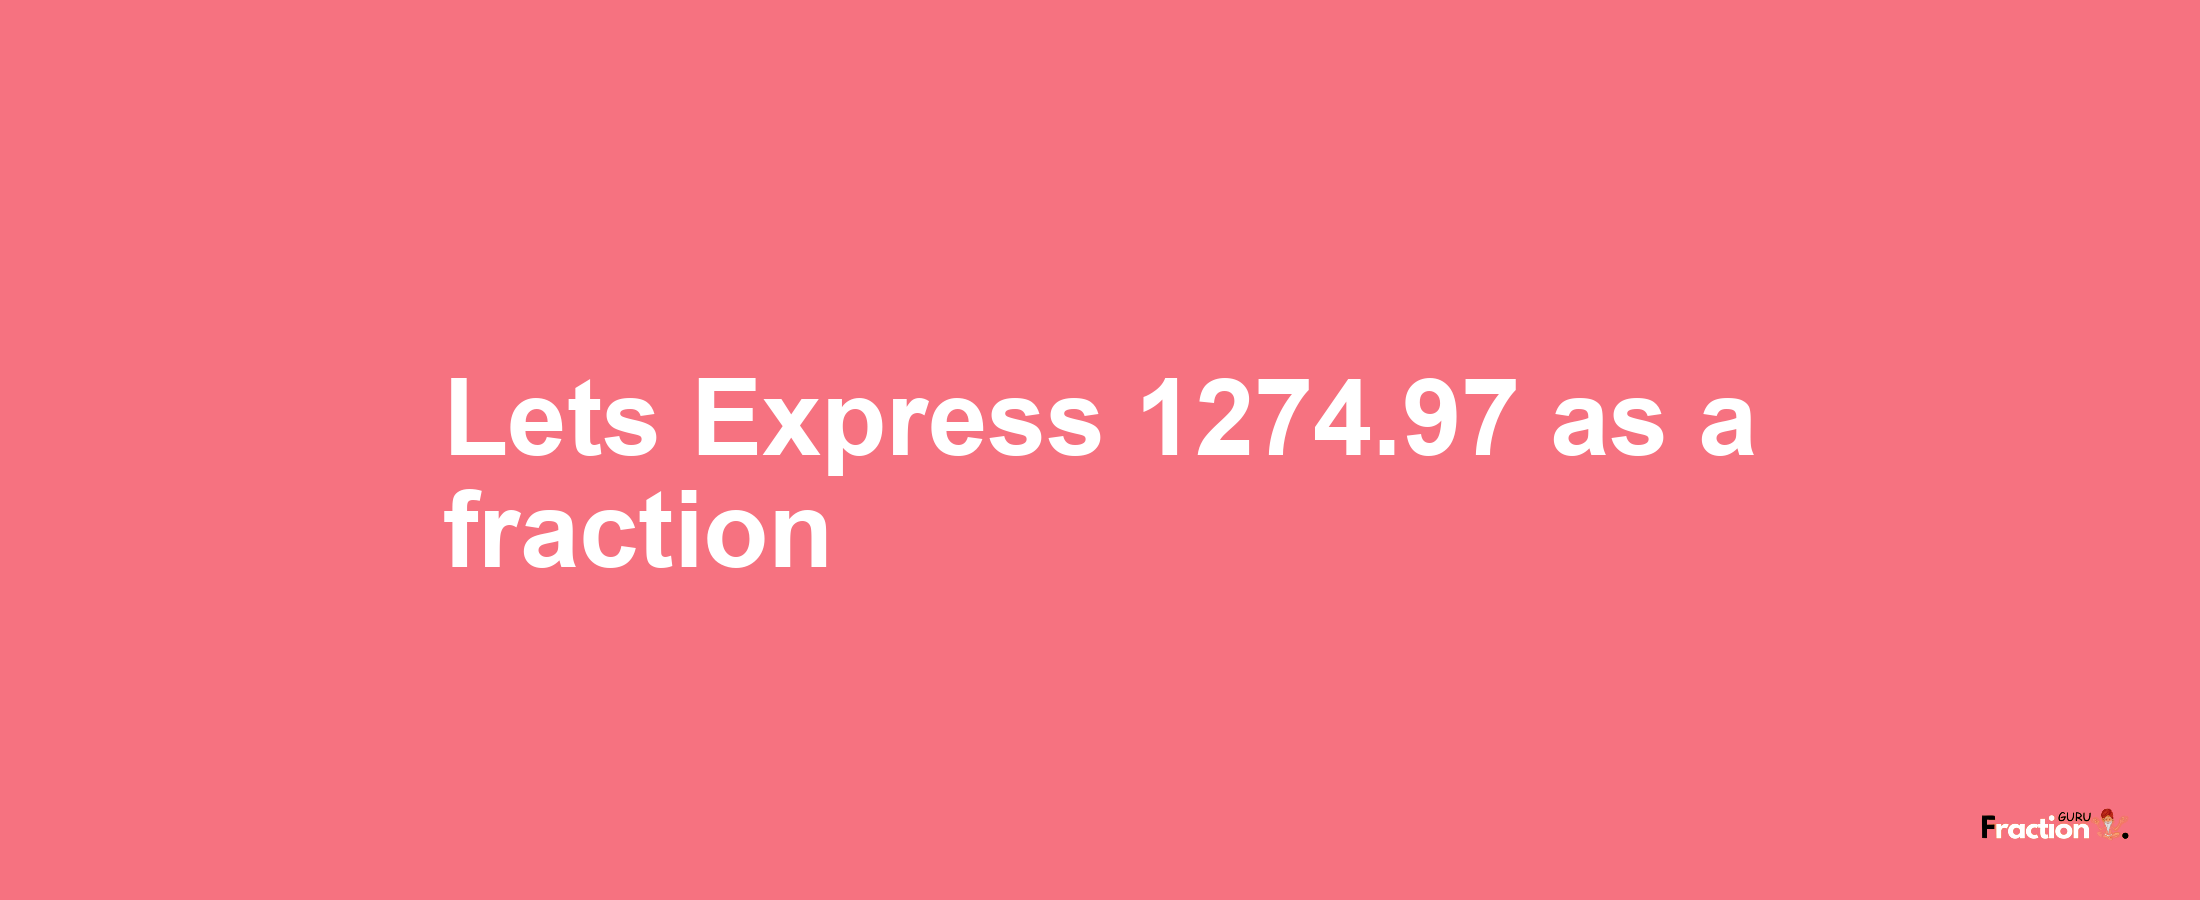 Lets Express 1274.97 as afraction